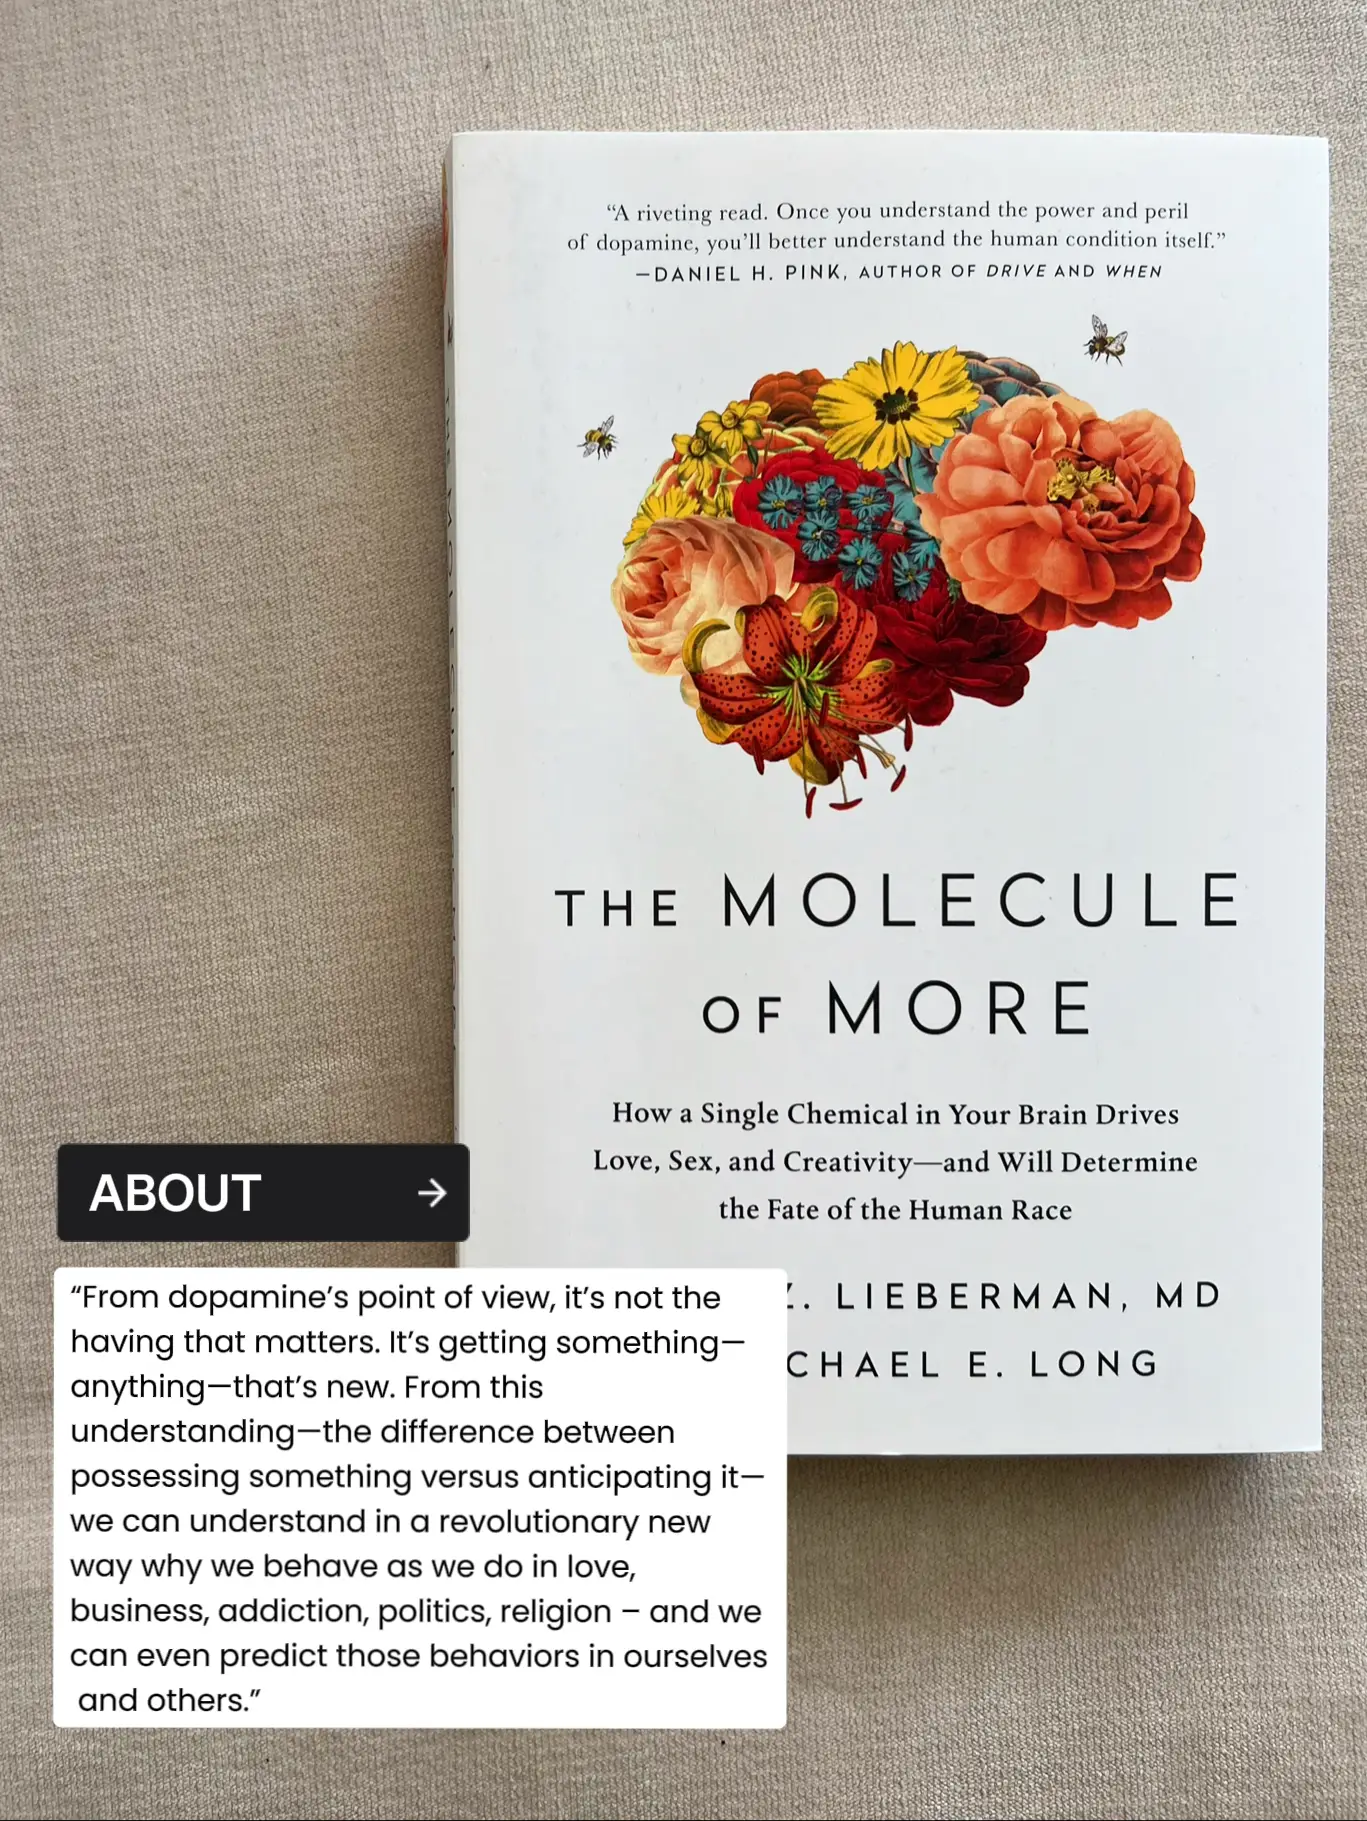 Materia Book Club and “The Molecule of More”